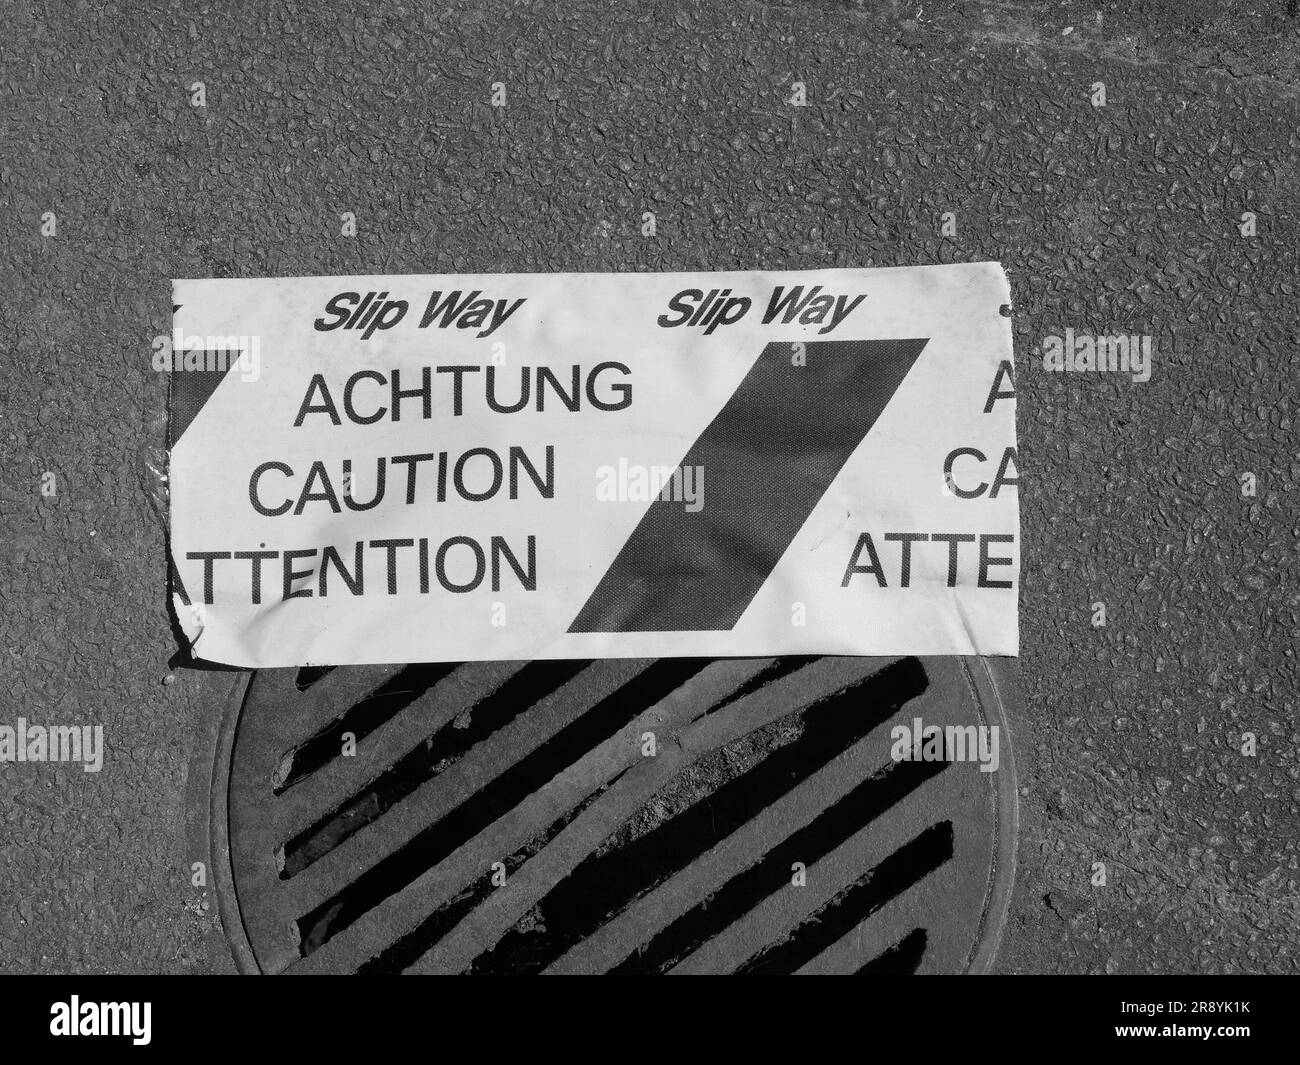 achtung translation caution attention slip way sign Stock Photo